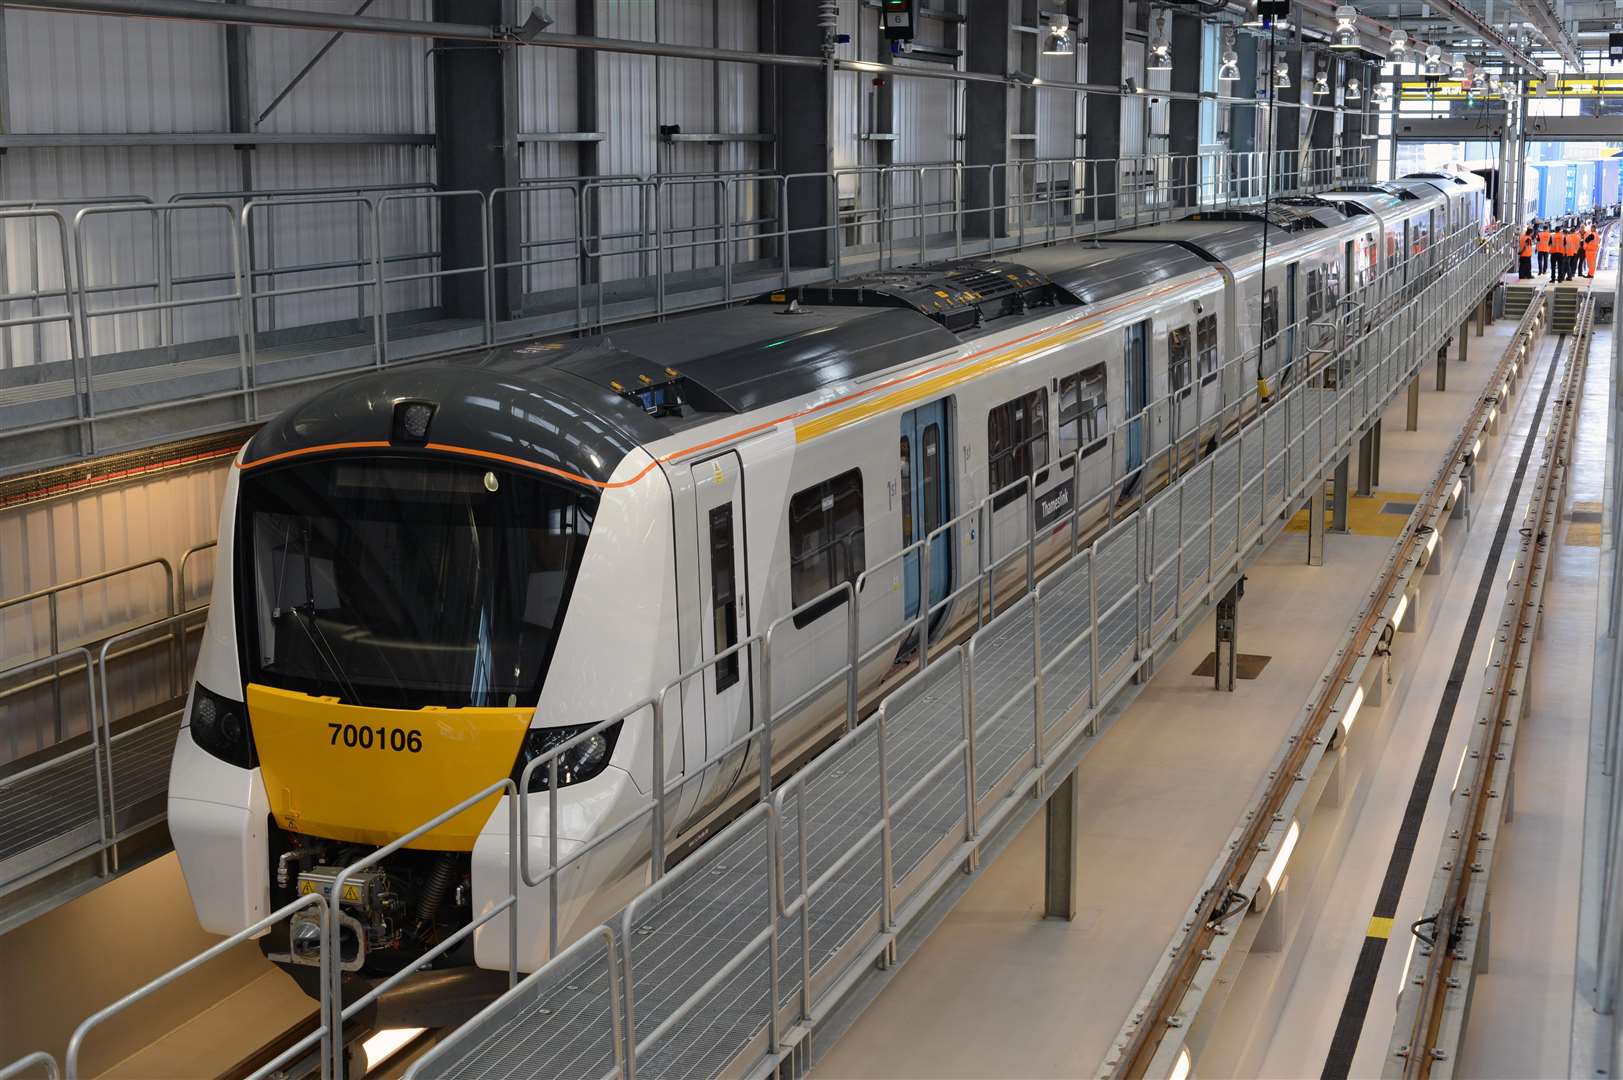 Thameslink services are set to be introduced in Maidstone from December 2019